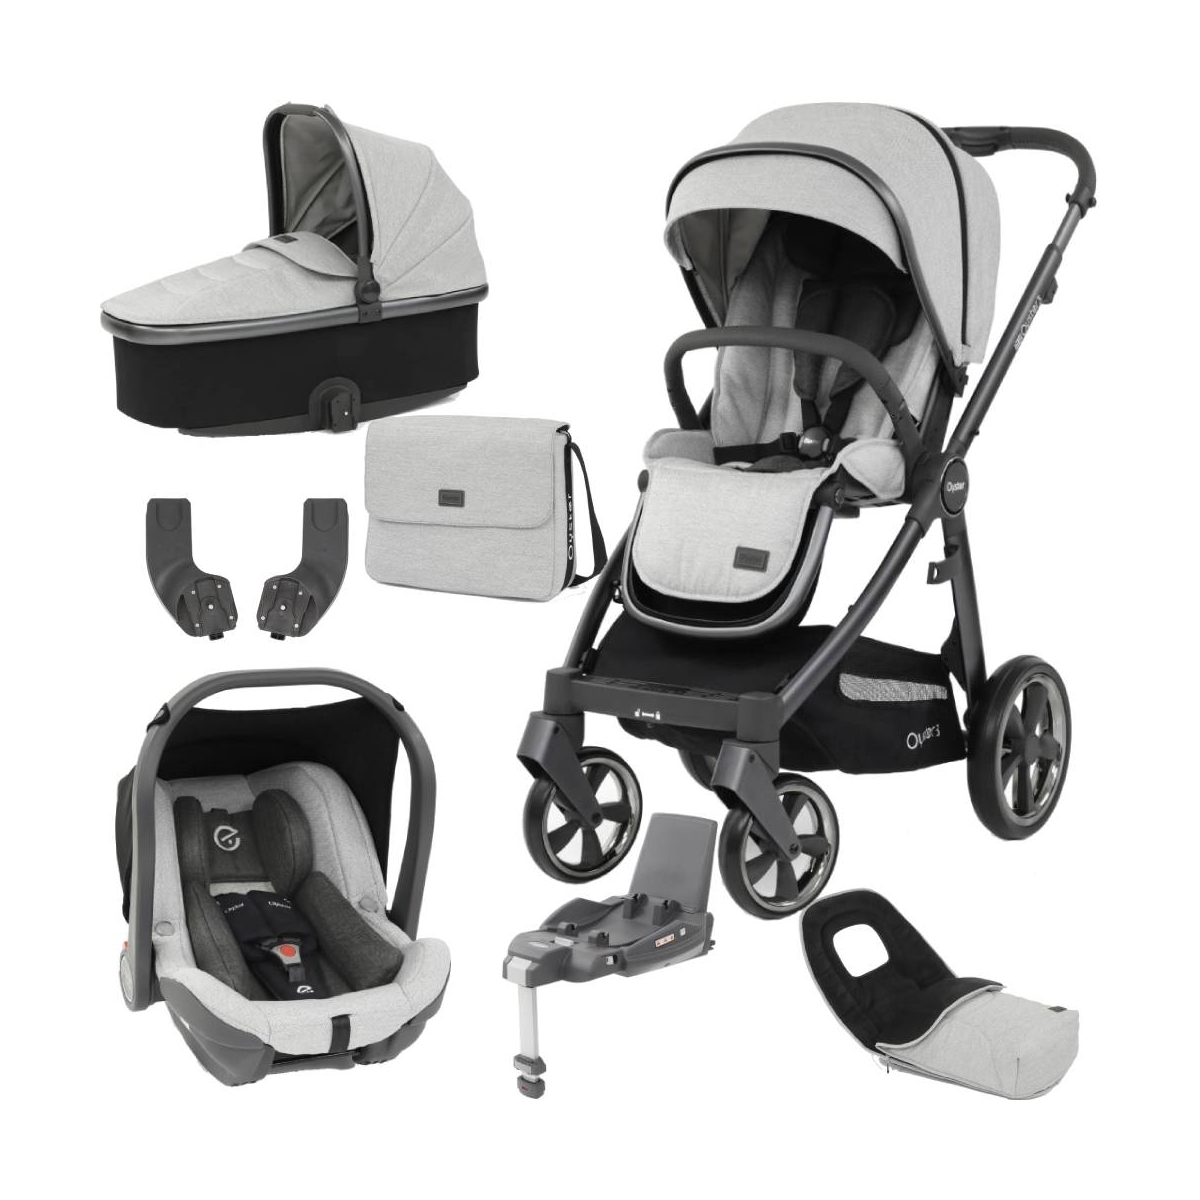 oyster 3 travel system dimensions